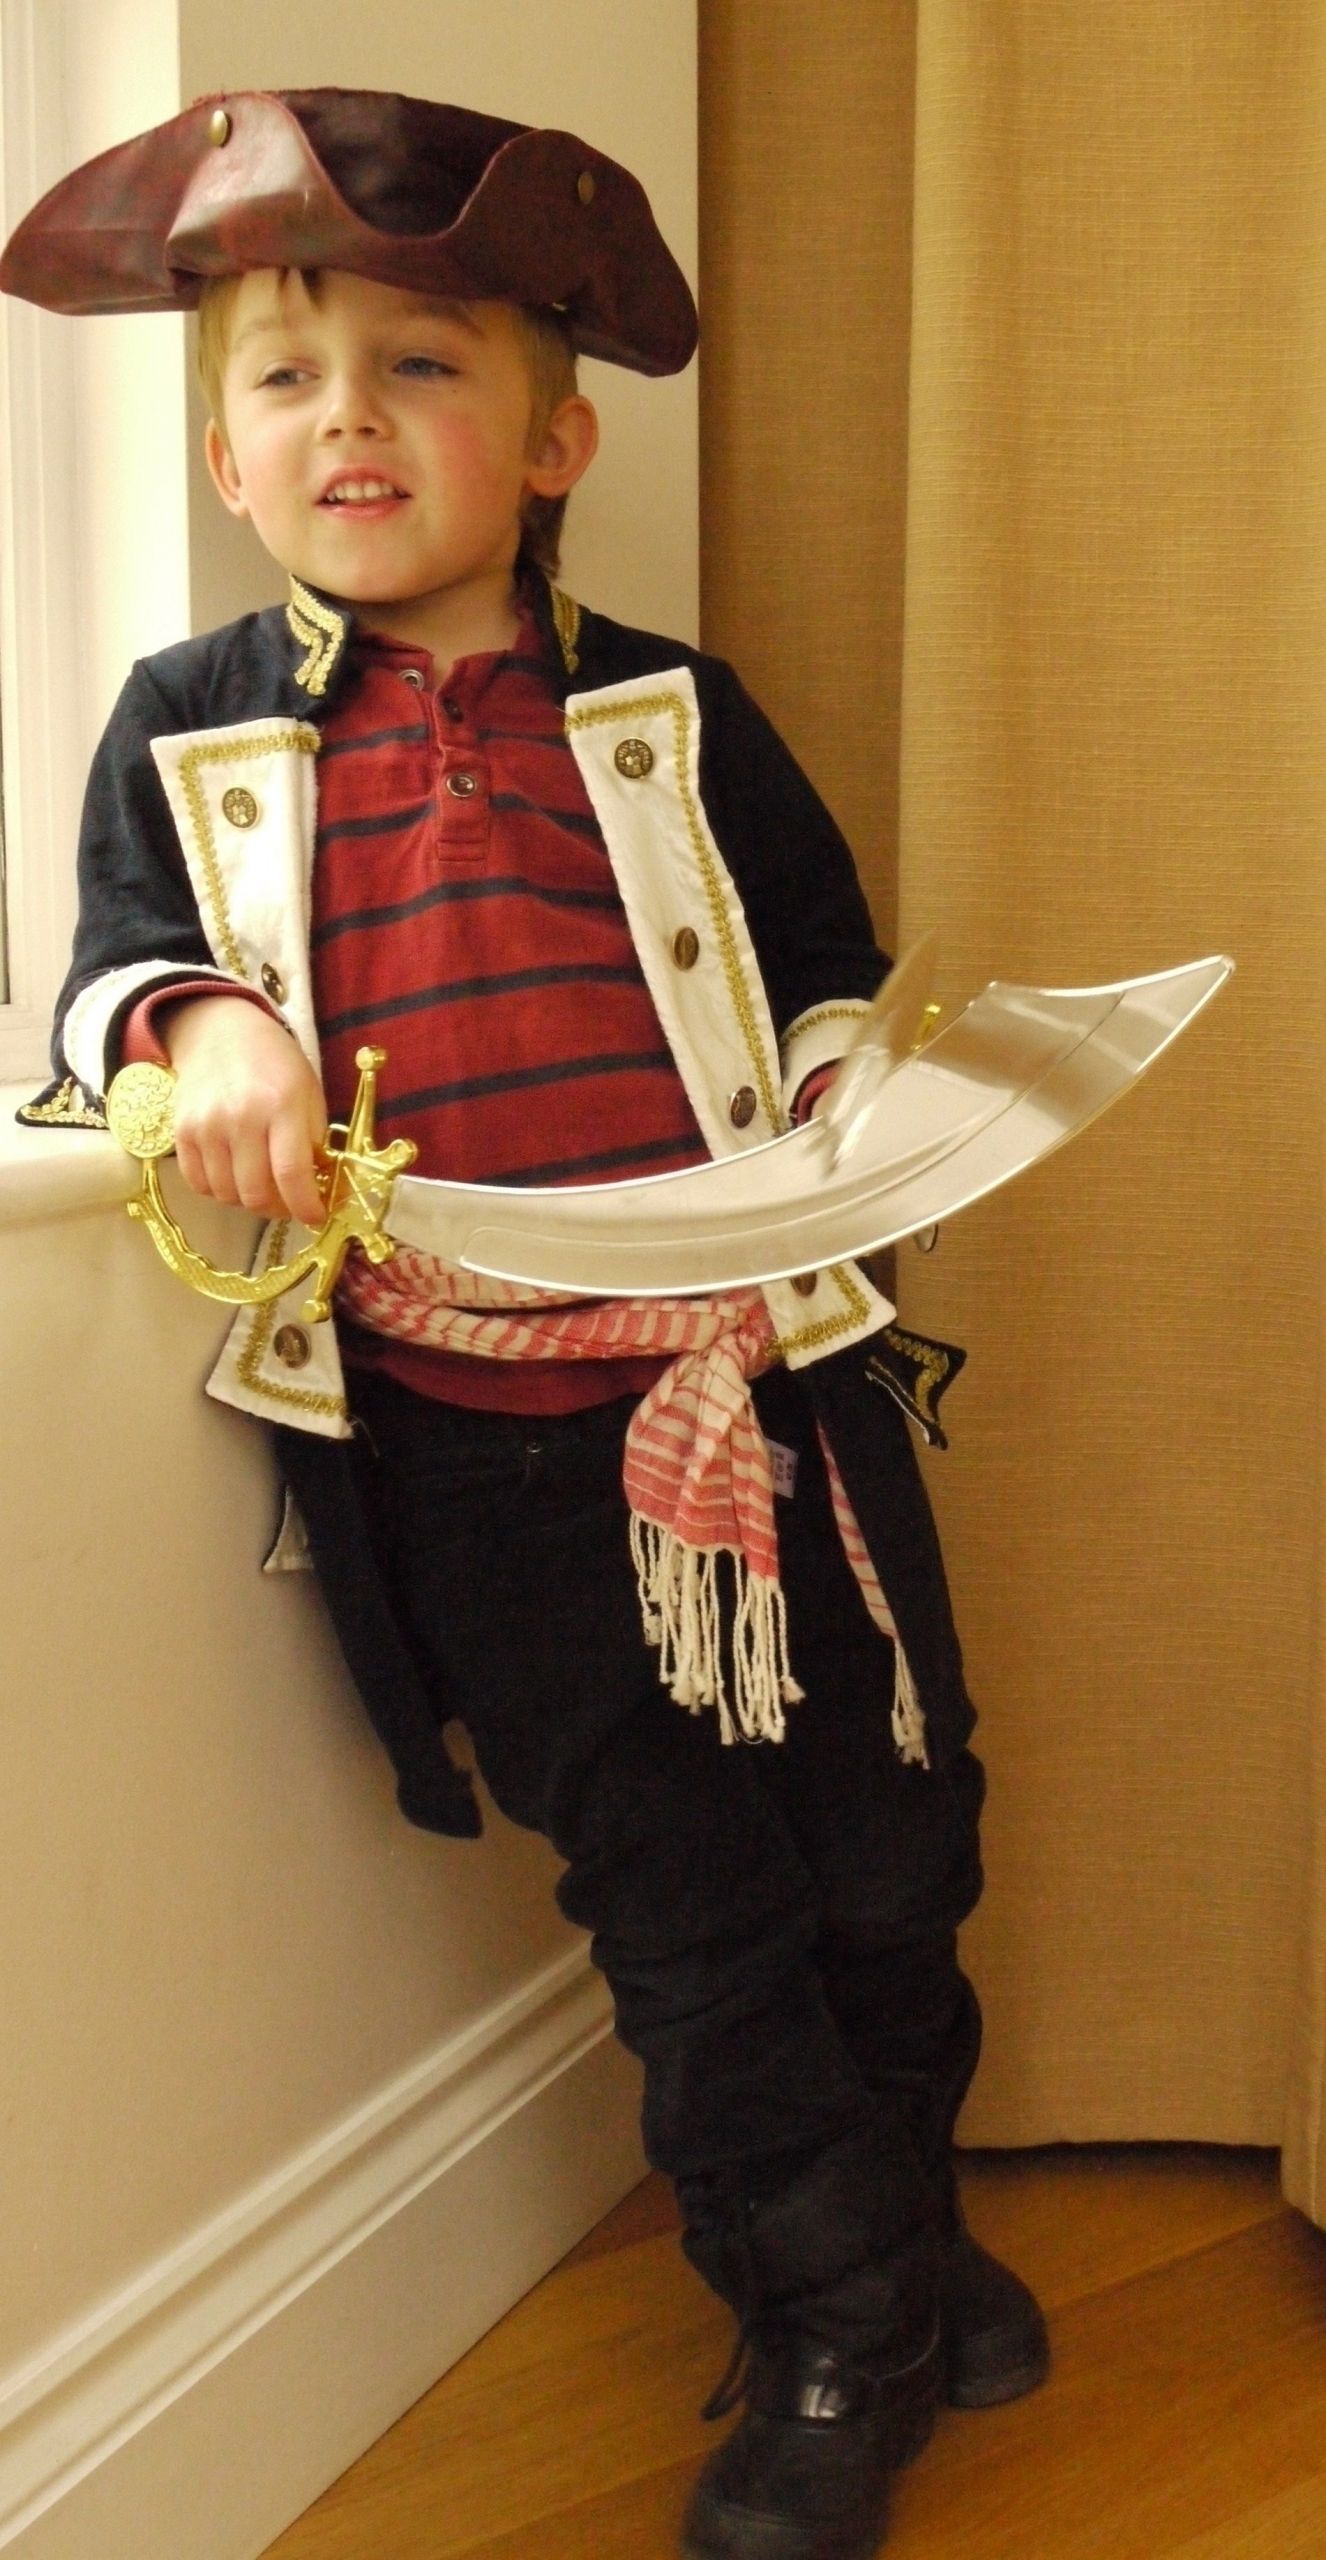 DIY Pirate Costumes For Kids
 10 Attractive Homemade Pirate Costume Ideas For Kids 2019